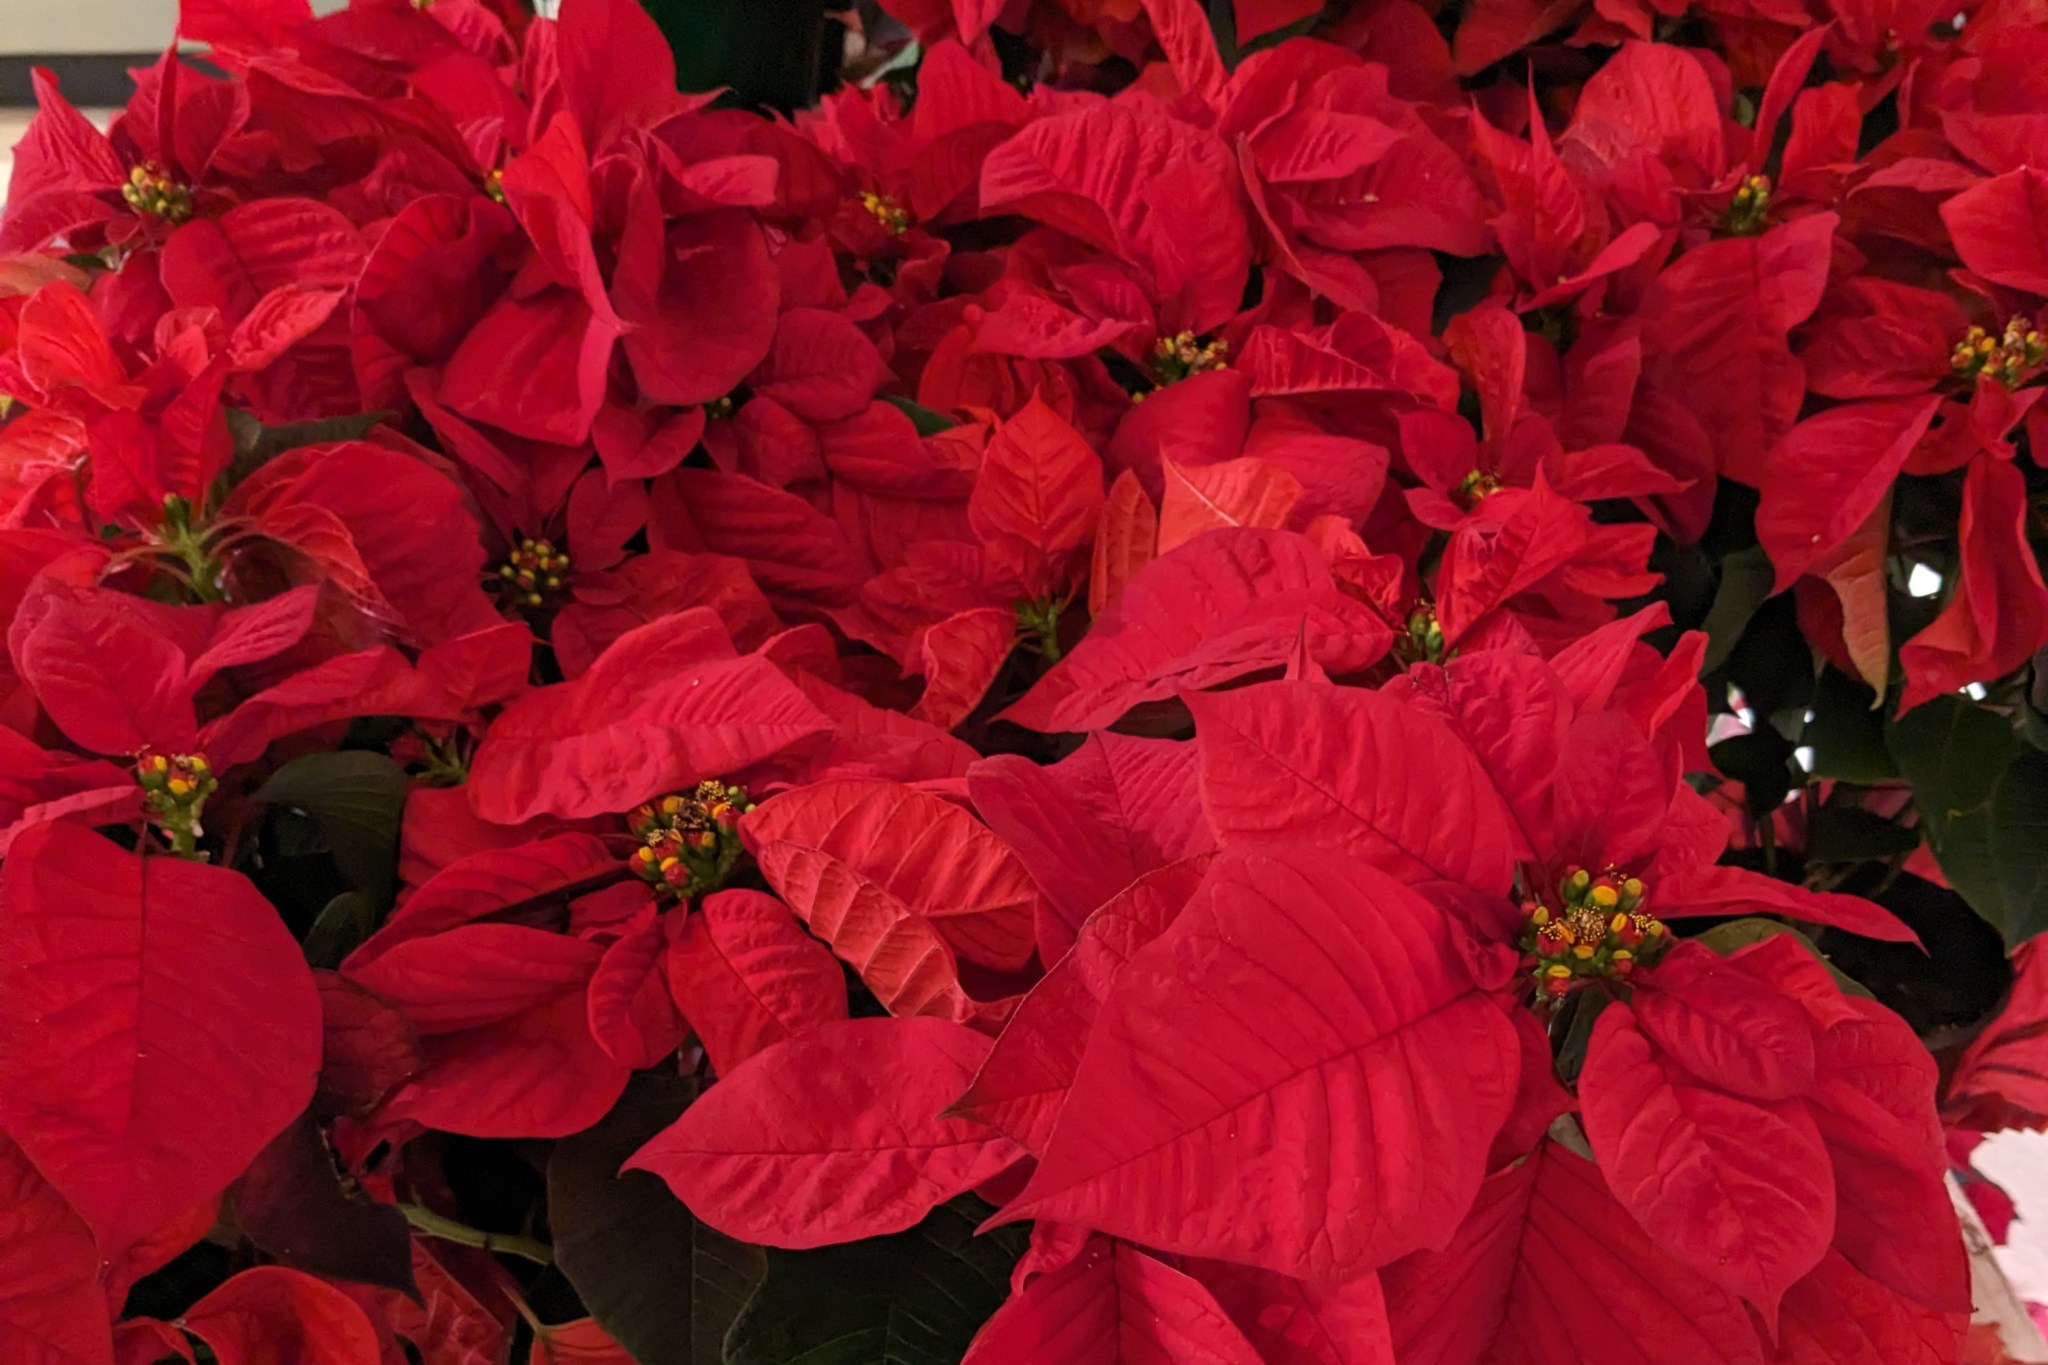 Several beautiful red poinsettias grouped together.